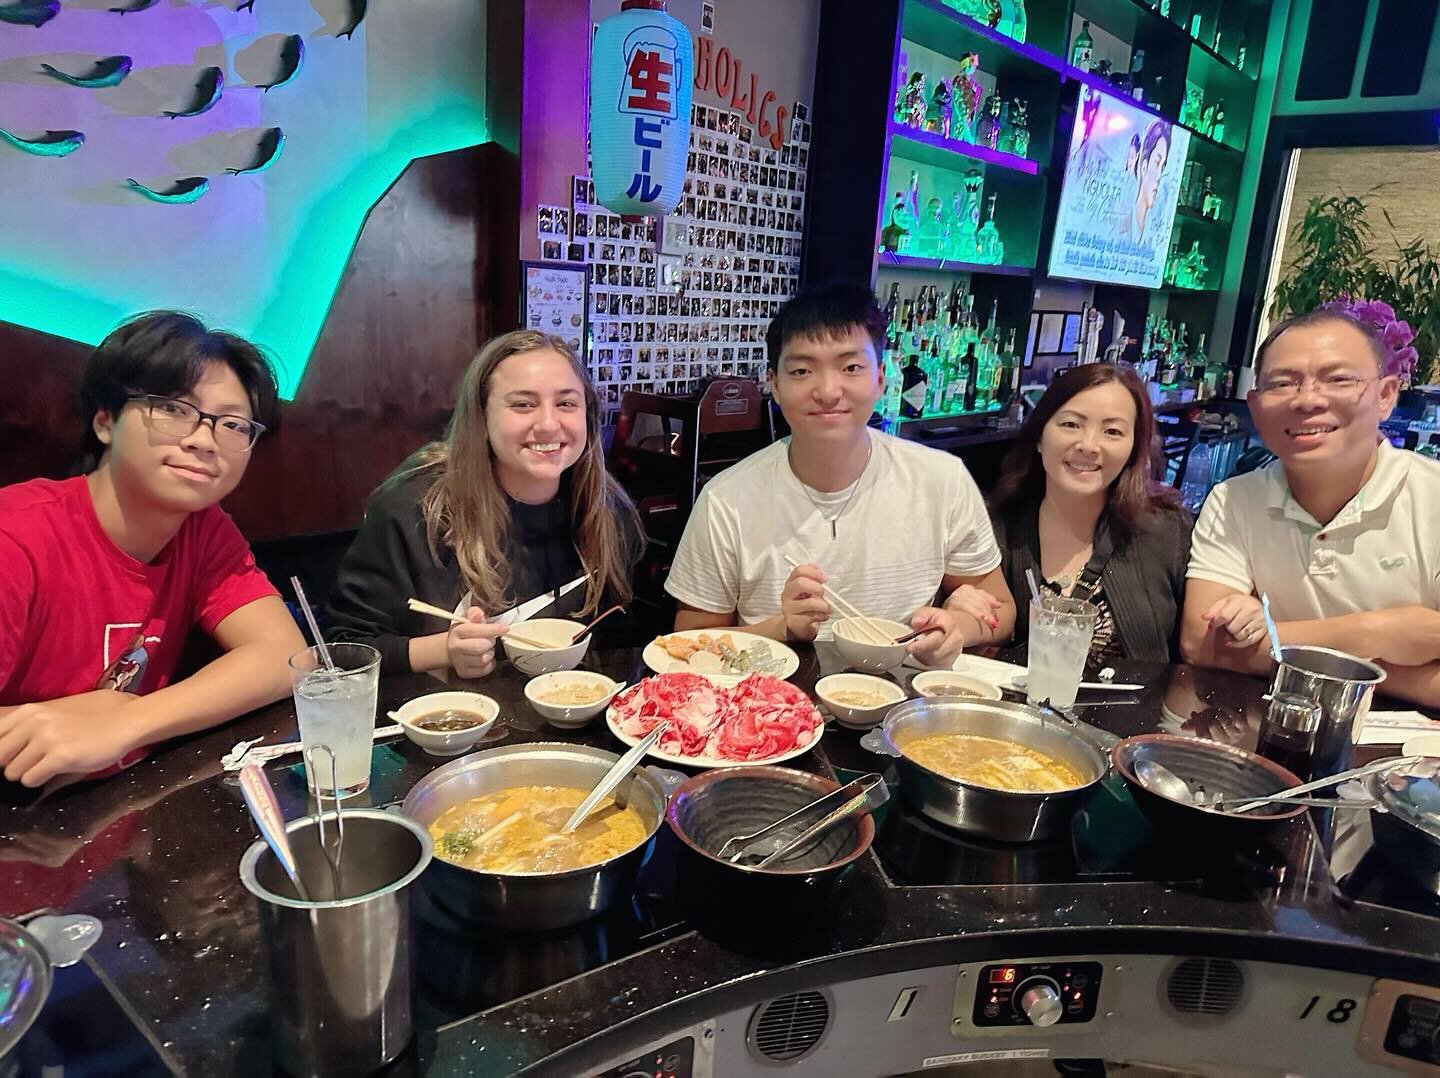 Cheers to warming up with Shabu Shabu on this chilly Wednesday! 🍶 Let's get over the hump day together. Gather your friends and come enjoy a comforting bowl with us! #HumpDayHotpot #ShabuWarmth